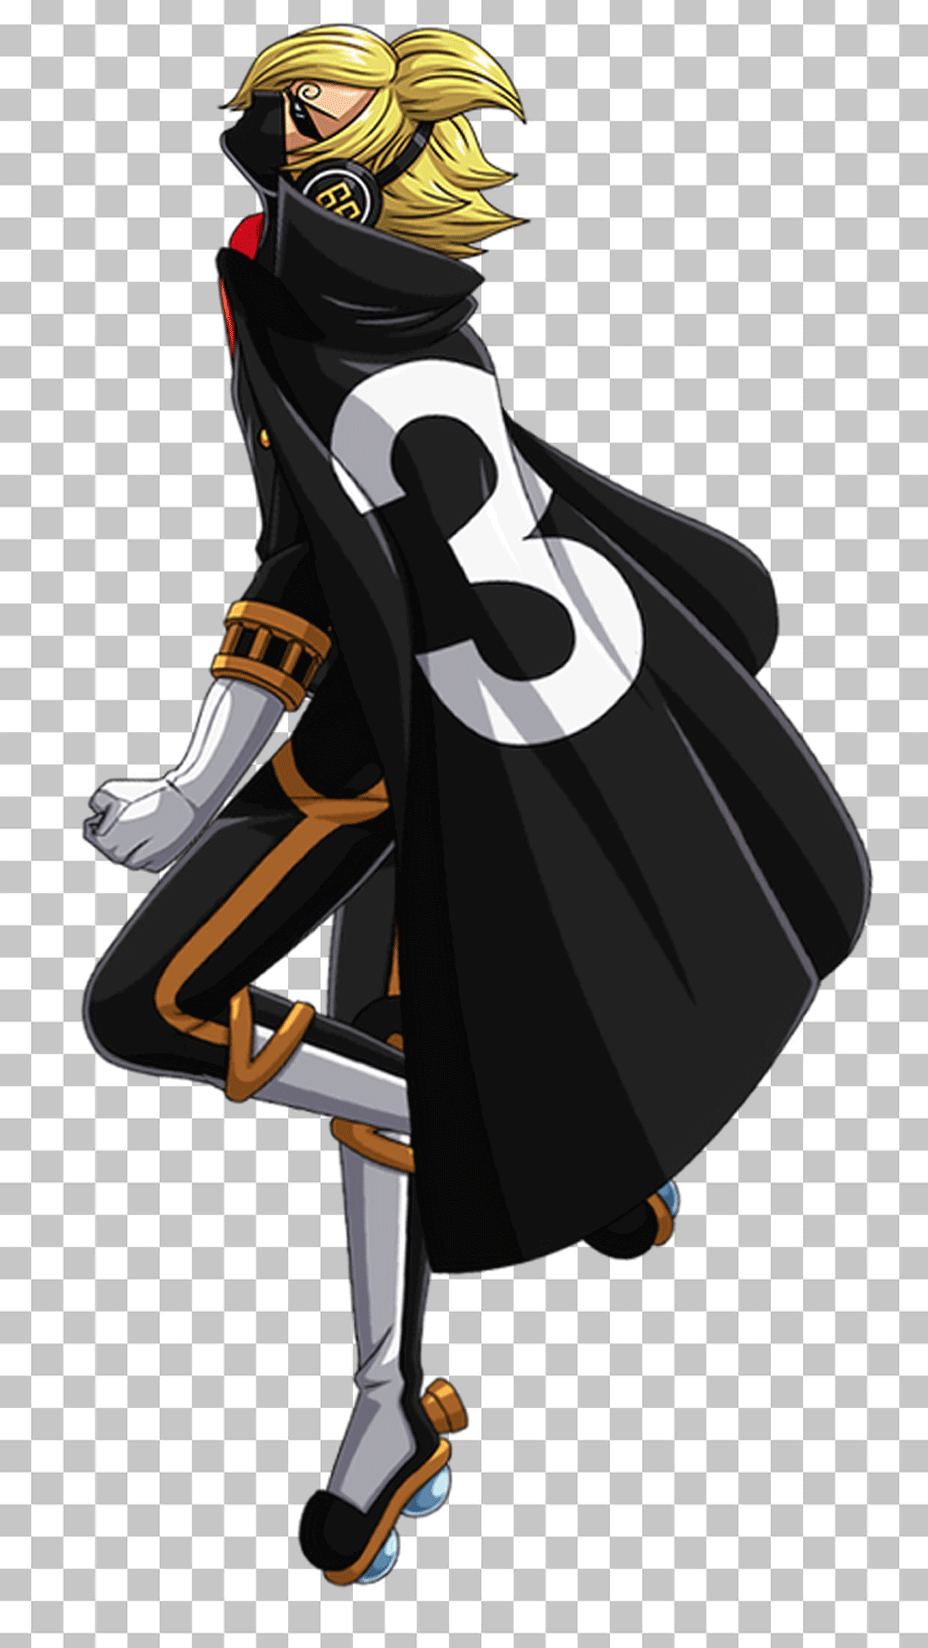 Sanji flying in Cape with Number 3 PNG Image